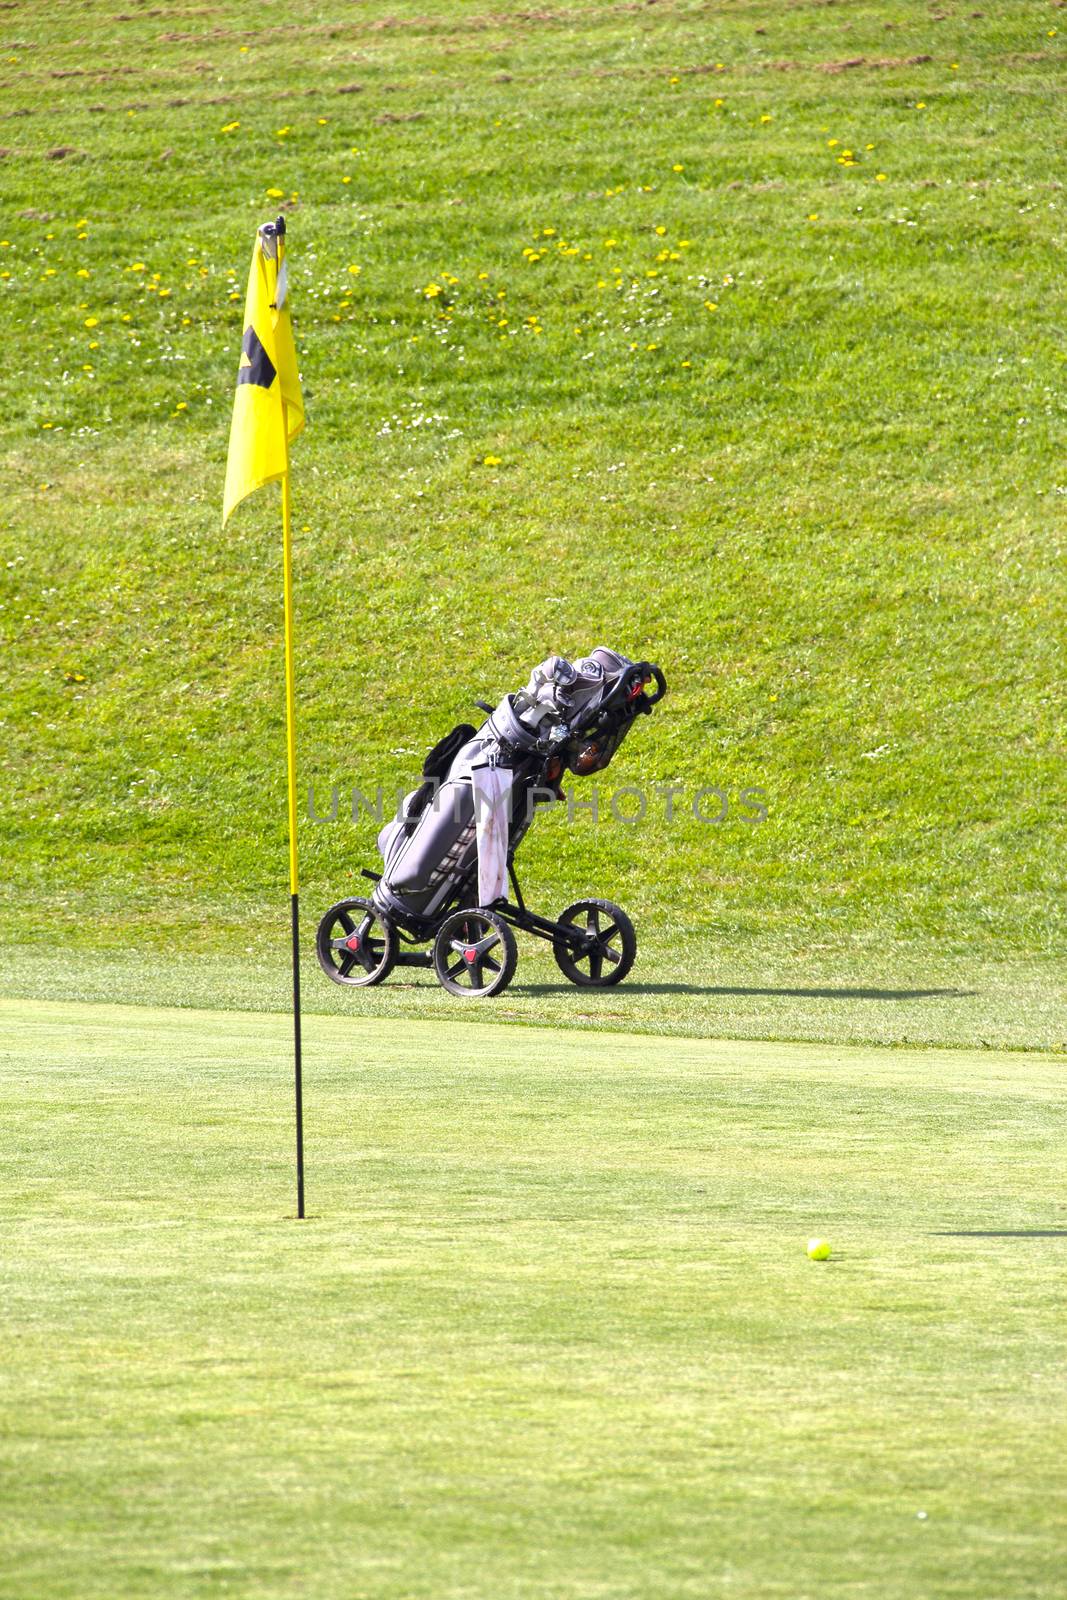 Flag and club trolley the golf field close-up view